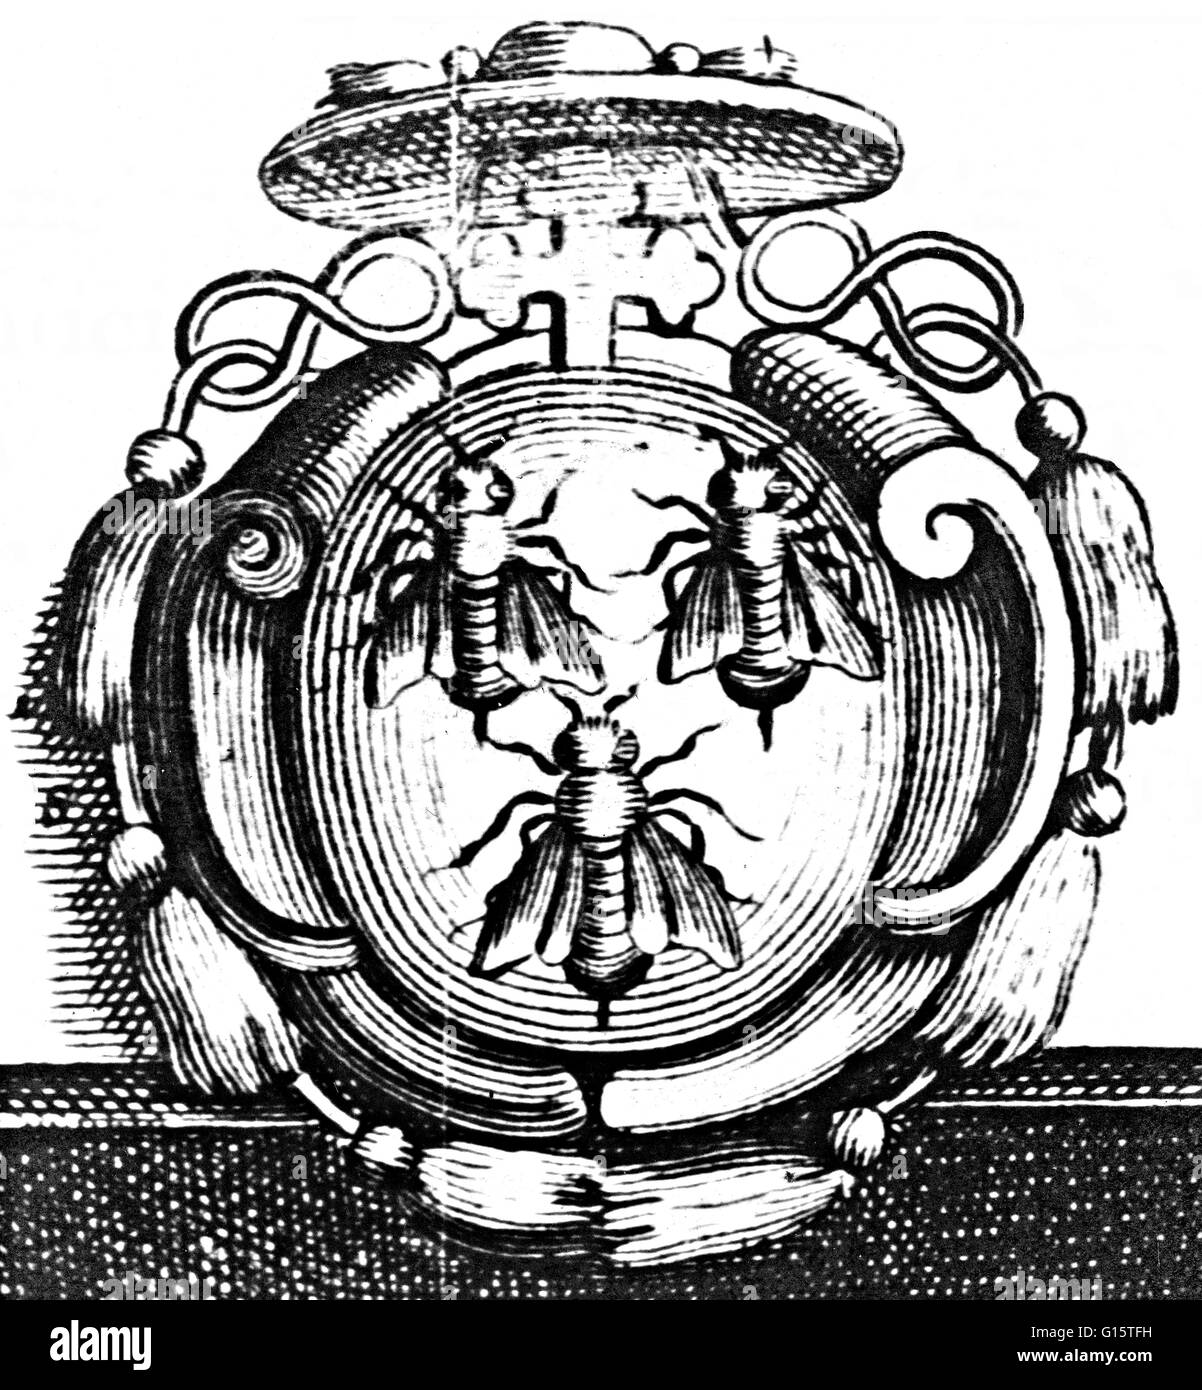 Coat of arms (three bees) for Francesco Barberini an Italian Catholic Cardinal. Ecclesiastical heraldry is the tradition of heraldry developed by Christian clergy. Initially used to mark documents, ecclesiastical heraldry evolved as a system for identifyi Stock Photo